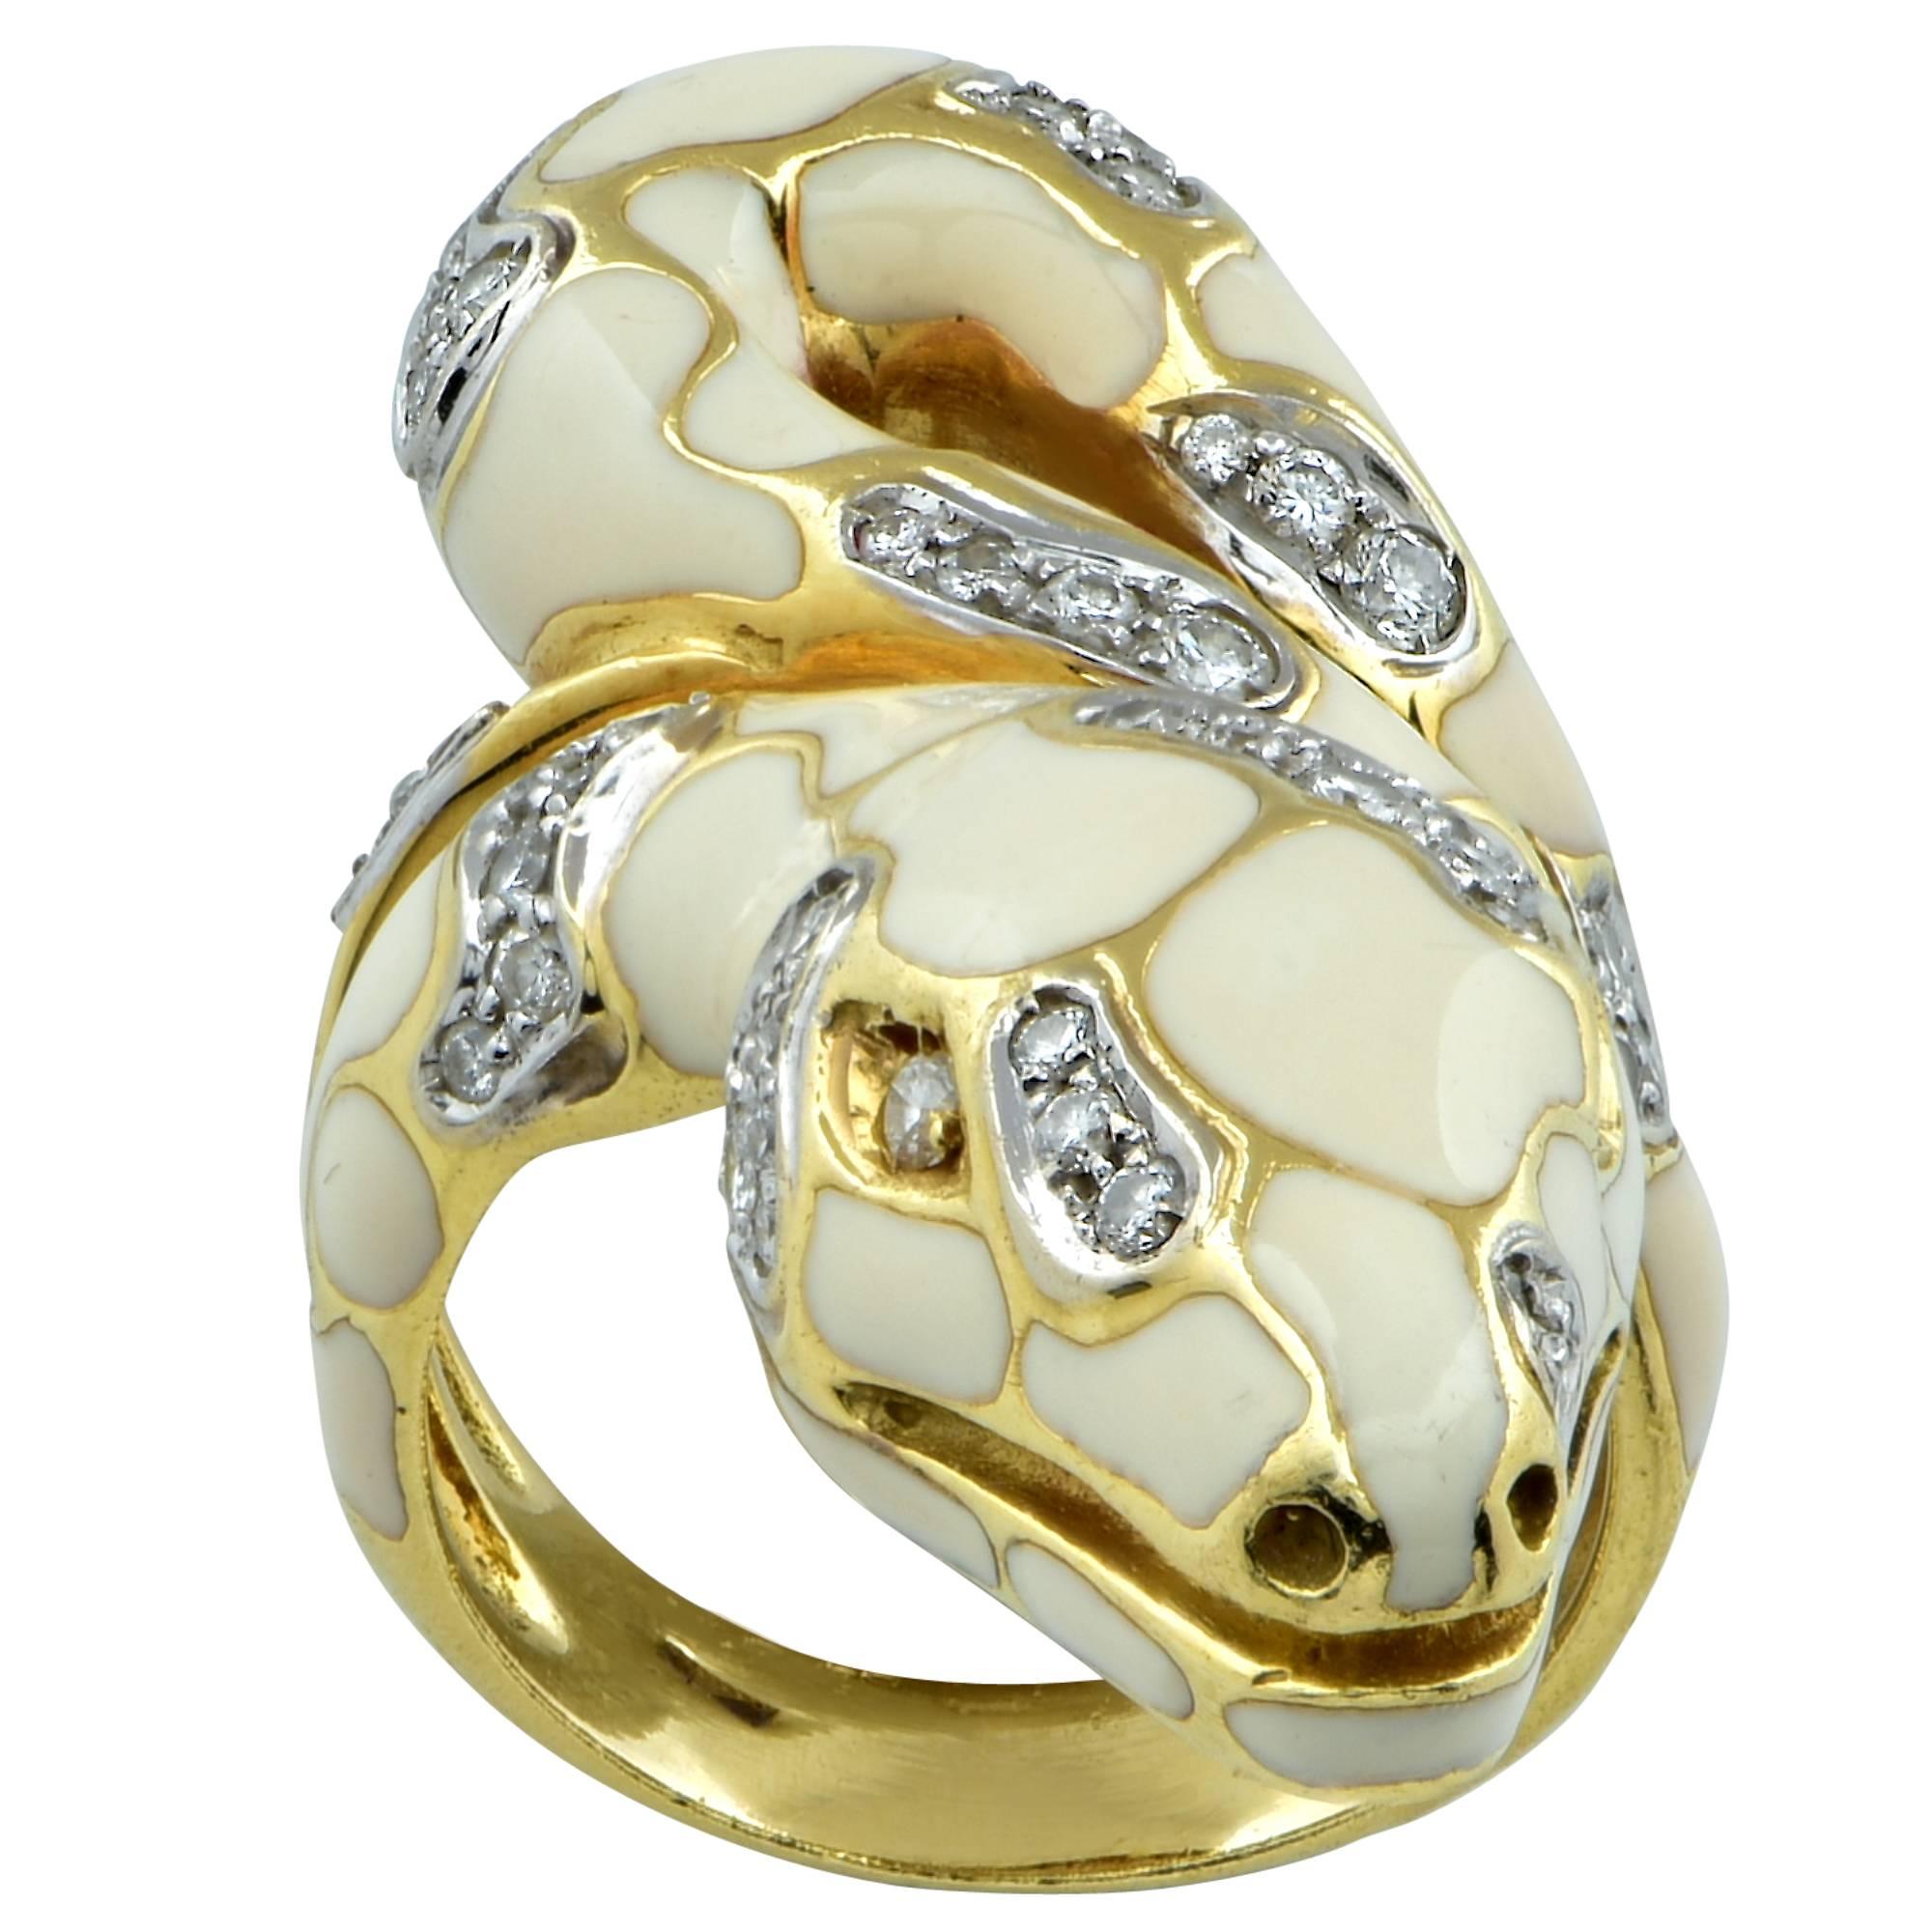 This sensational snake ring is crafted in 18k yellow gold and is enriched with cream colored enamel . The ring is further enhanced with diamond scales studded with 59 round brilliant cut diamonds weighing approximately .80 carats, G color, VS